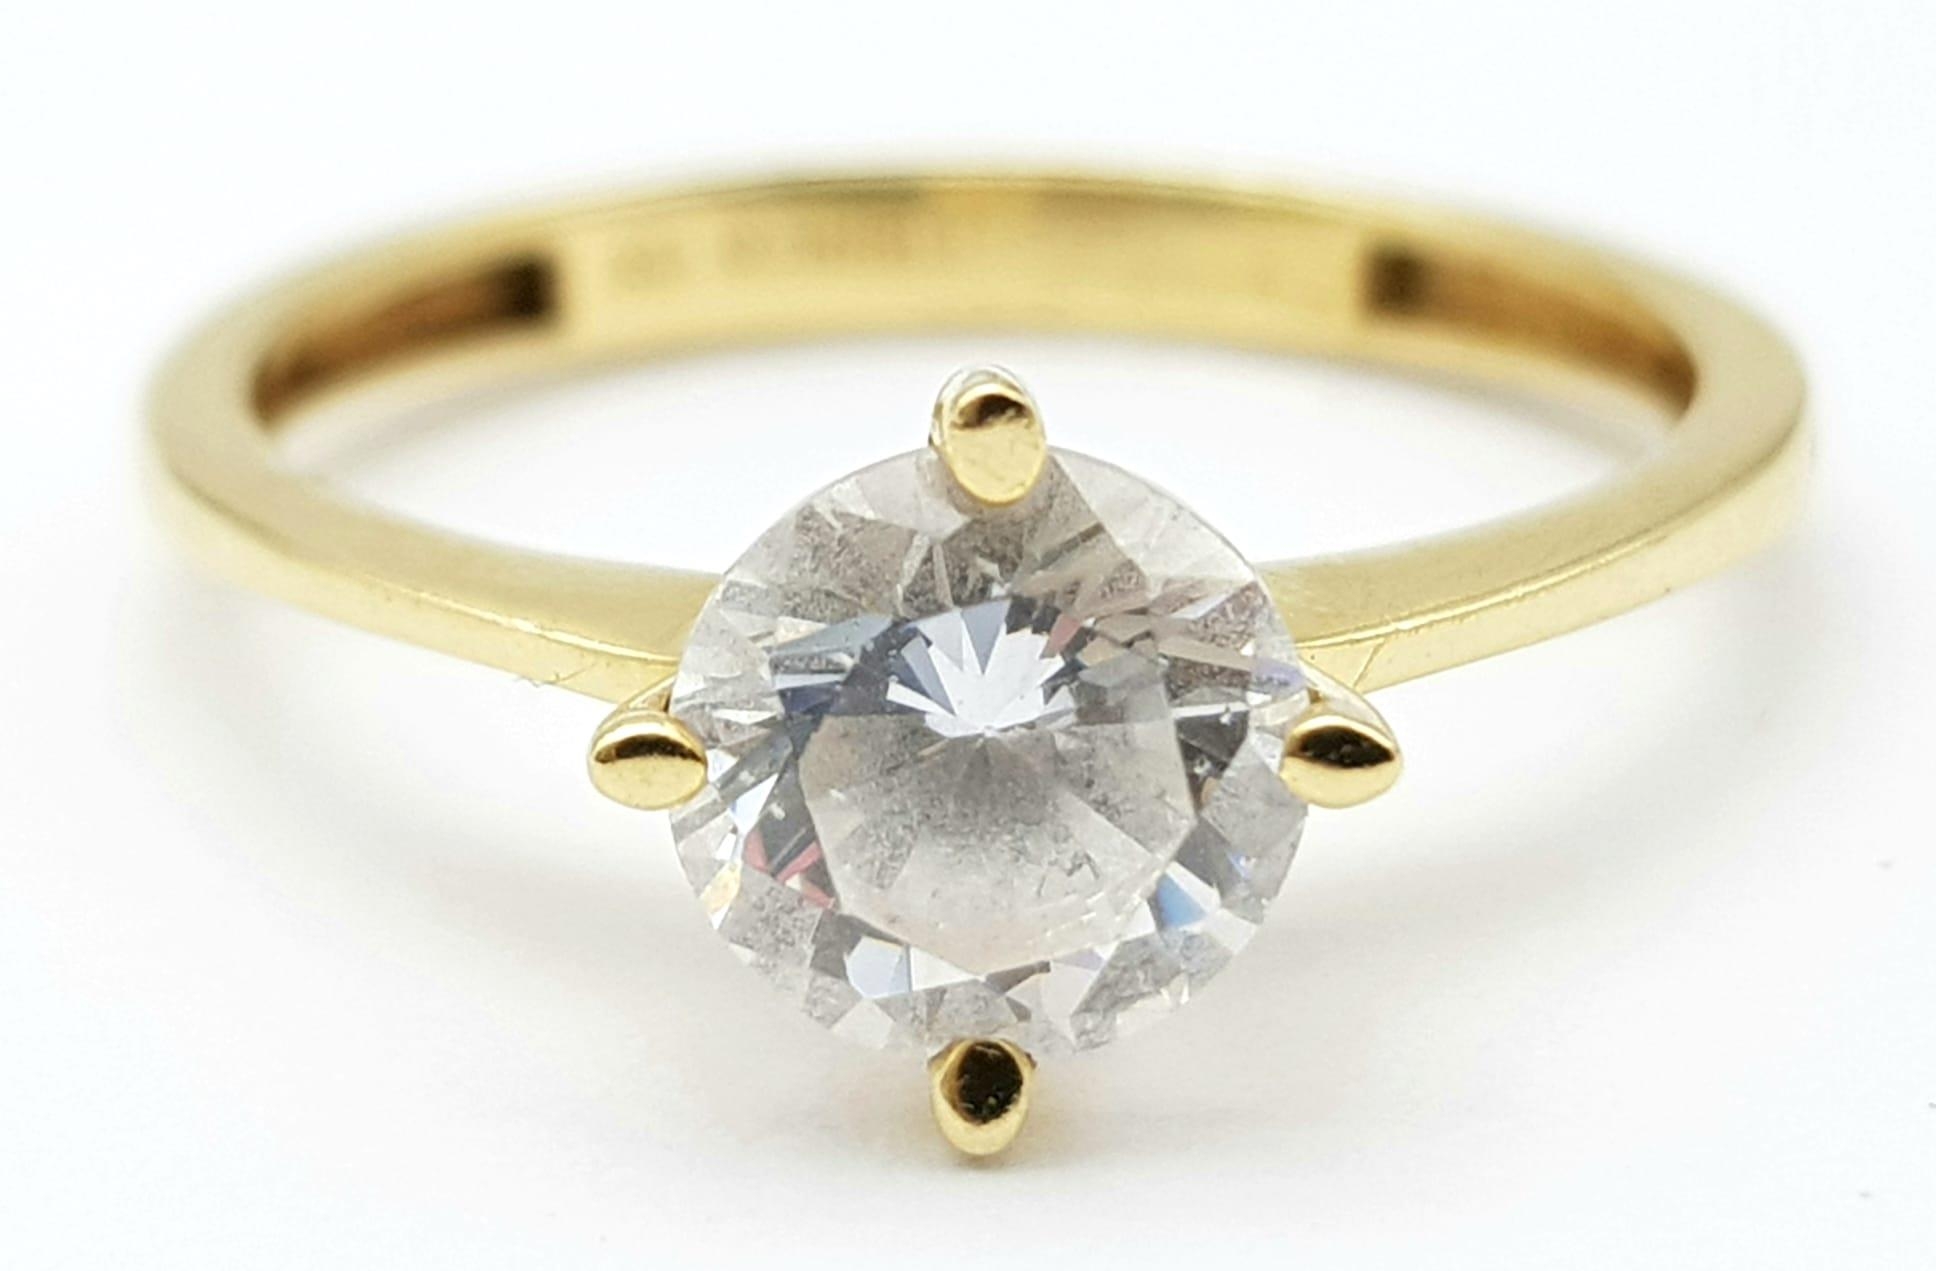 A 14K Yellow Gold Zircon Solitaire Ring PLUS a 14K White Gold Diamond Bracelet. Ring - 1ct - Image 3 of 7